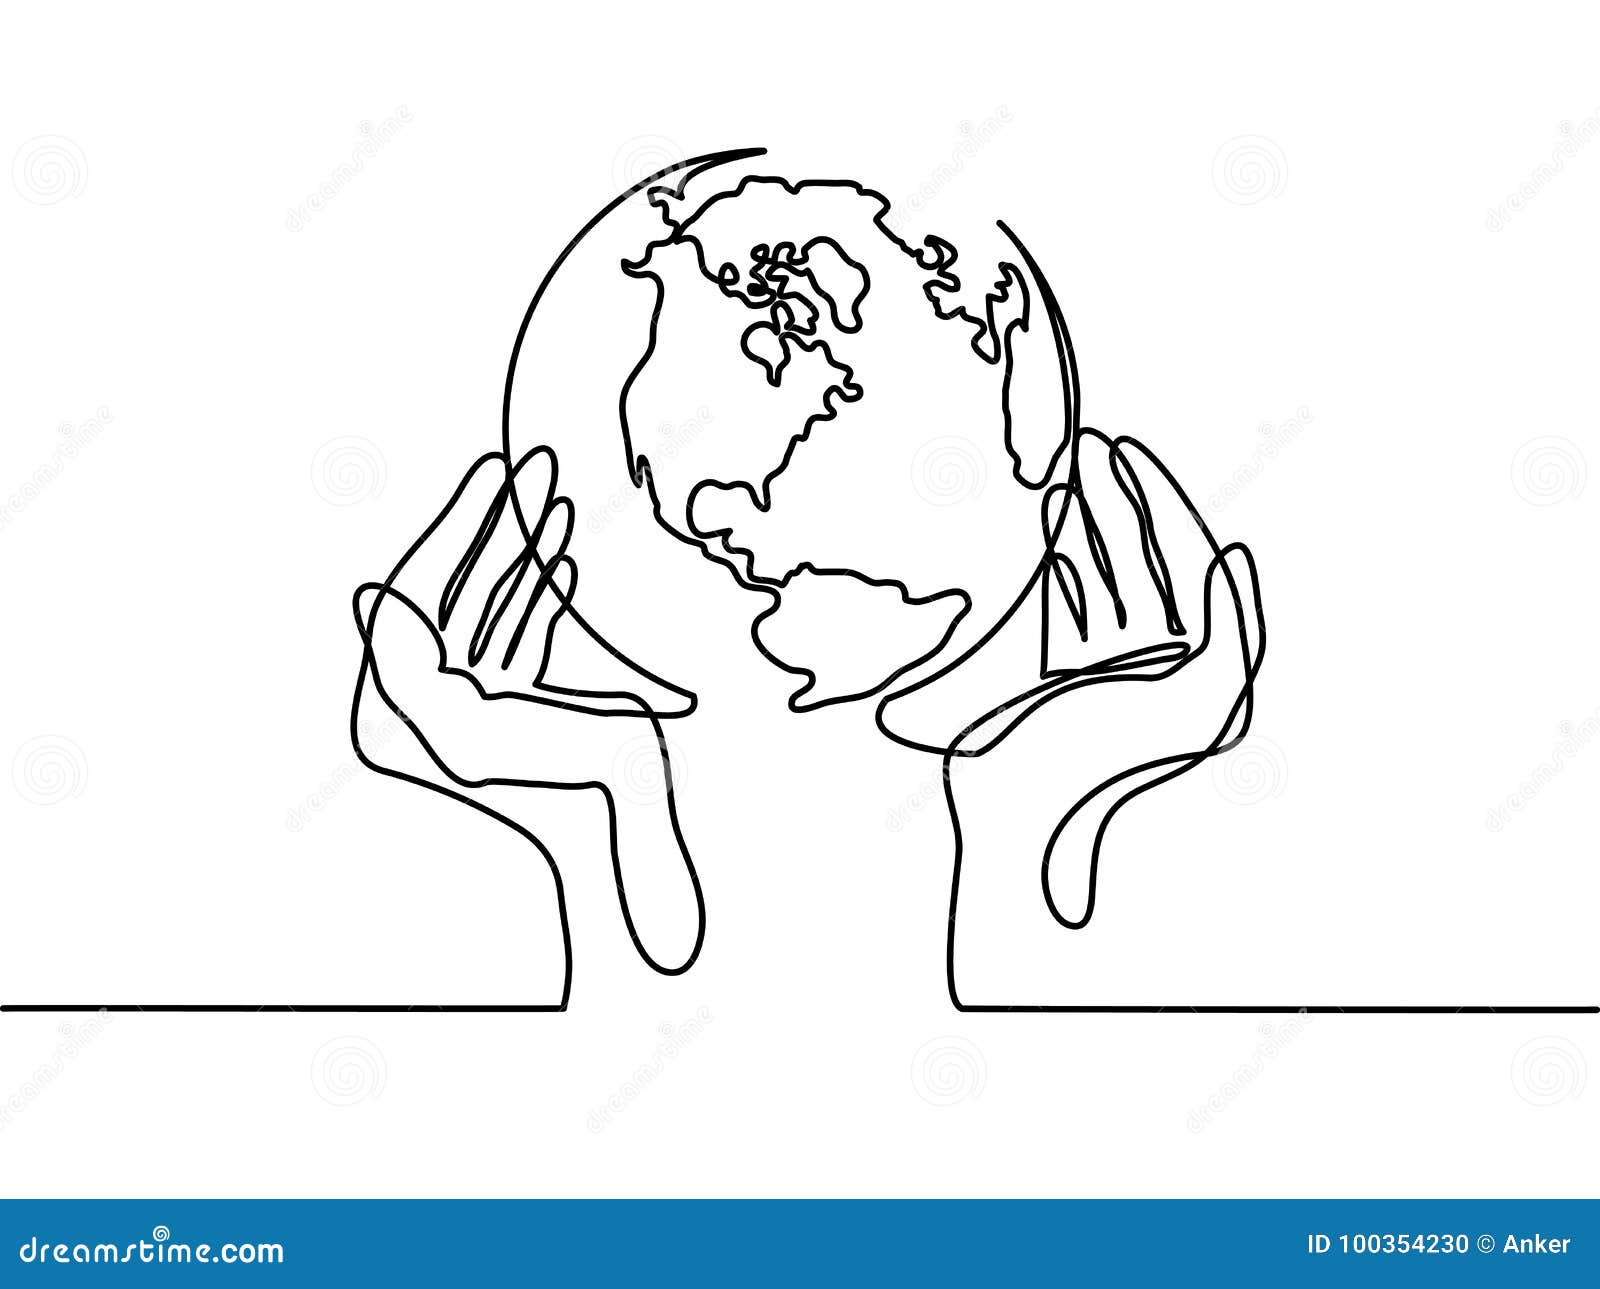 Sketch of the earth isolated Royalty Free Vector Image